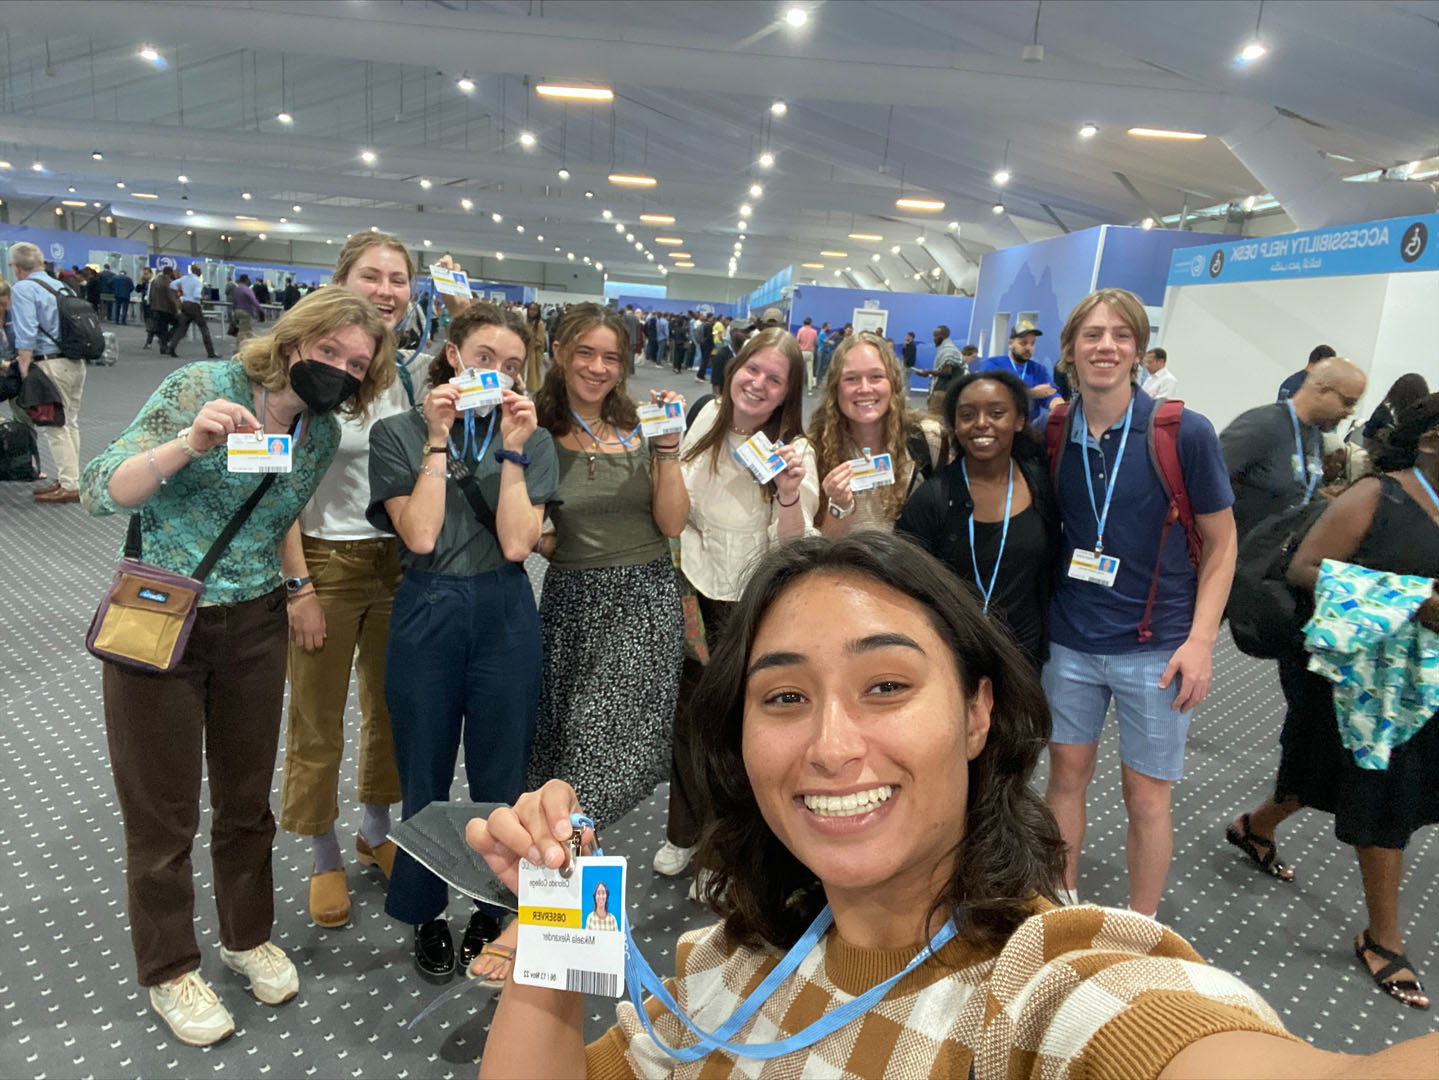 Olivia Jacobson '22, Gracie Roe '25, Reeve Schroeder '24, Mary Andrews '23, Mika Alexander '23, Rhetta Power '23, Layla Haji '25, Owen Brown '24, and Naomi Henry '24 are pictured getting their badges at COP 27. Photo taken and submitted by Mika Alexander '23.